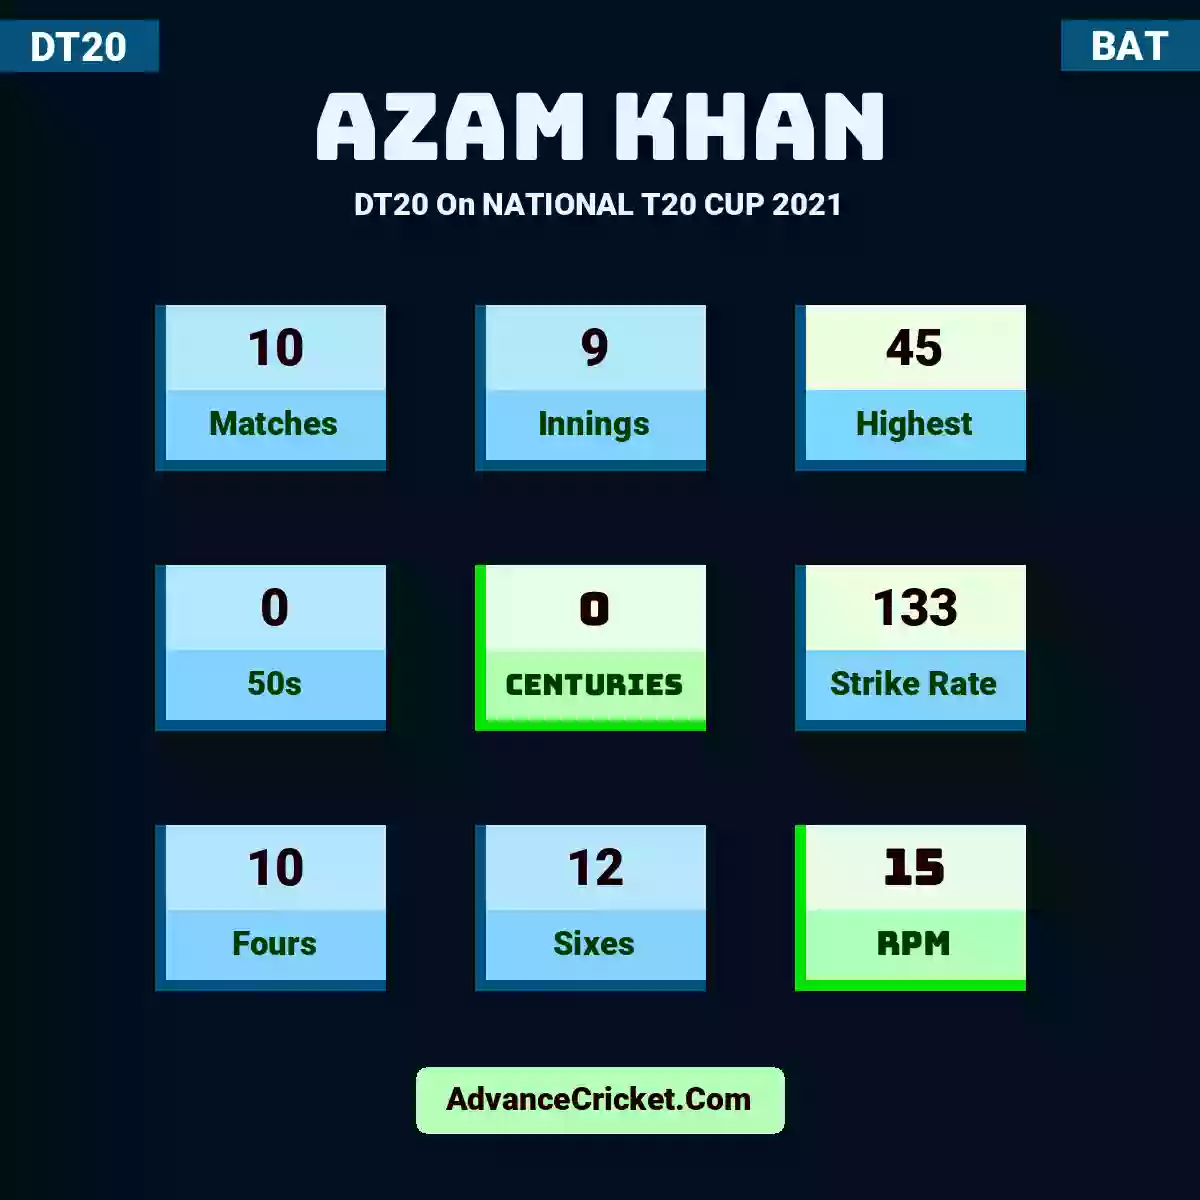 Azam Khan DT20  On NATIONAL T20 CUP 2021, Azam Khan played 10 matches, scored 45 runs as highest, 0 half-centuries, and 0 centuries, with a strike rate of 133. A.Khan hit 10 fours and 12 sixes, with an RPM of 15.